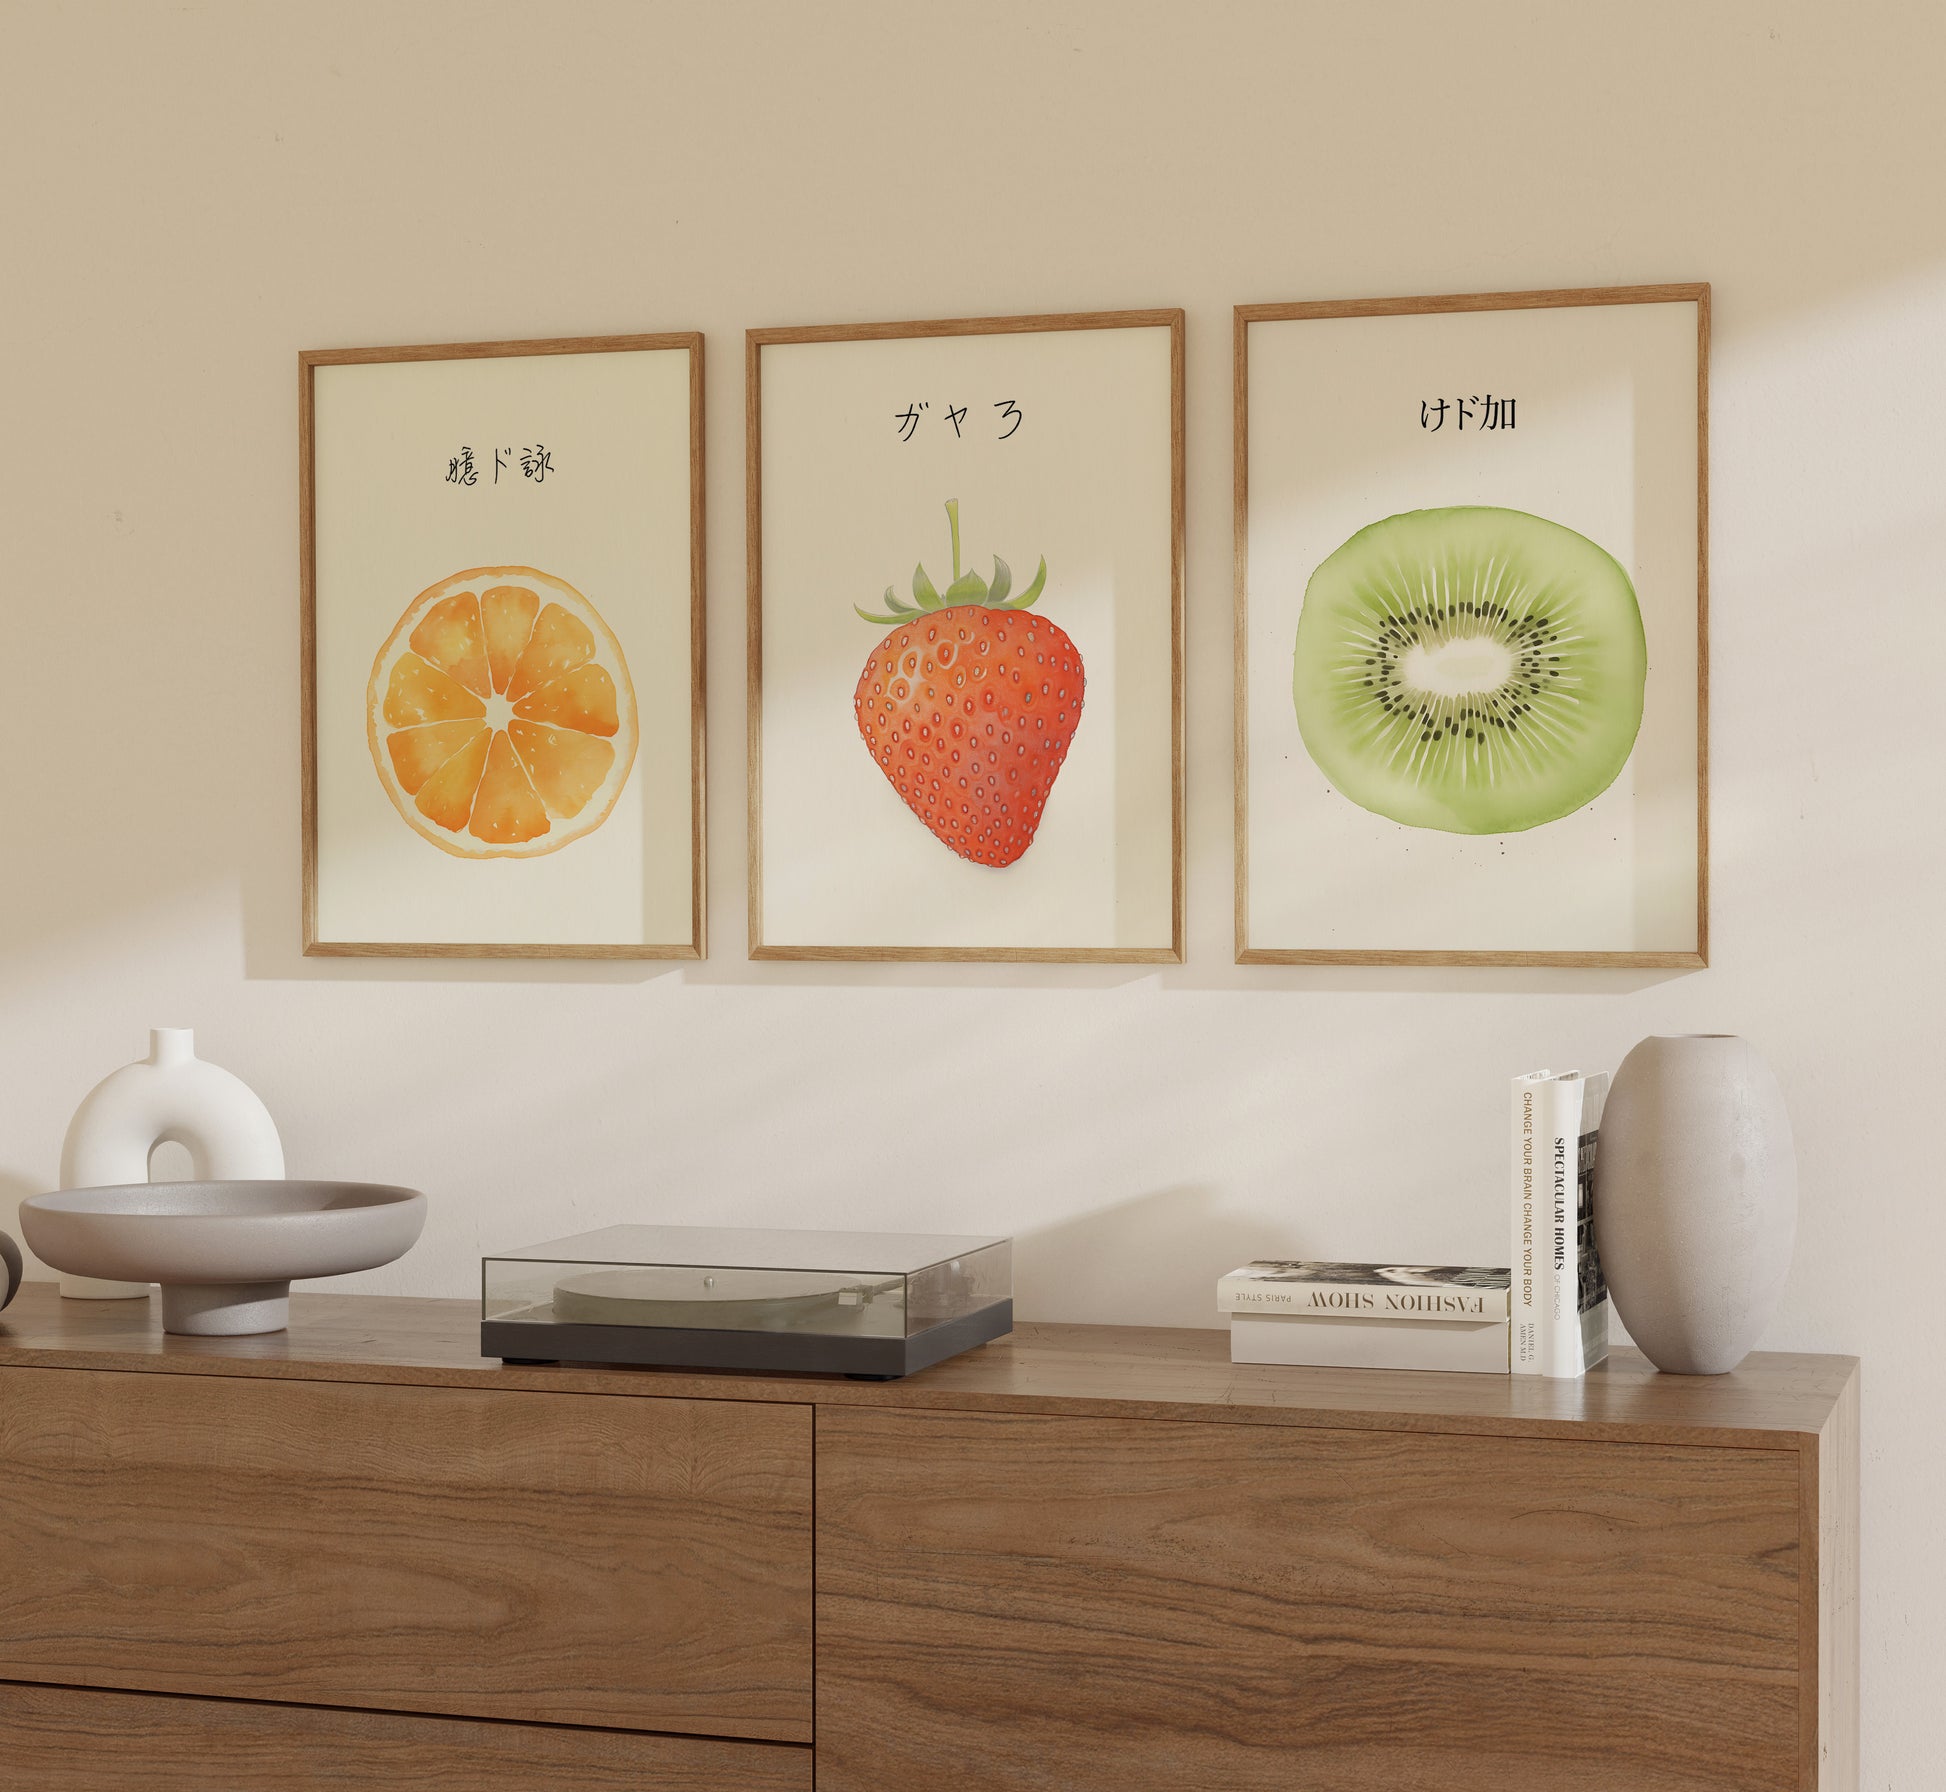 Three framed pictures of fruit with Japanese writing hanging on a wall above a sideboard.